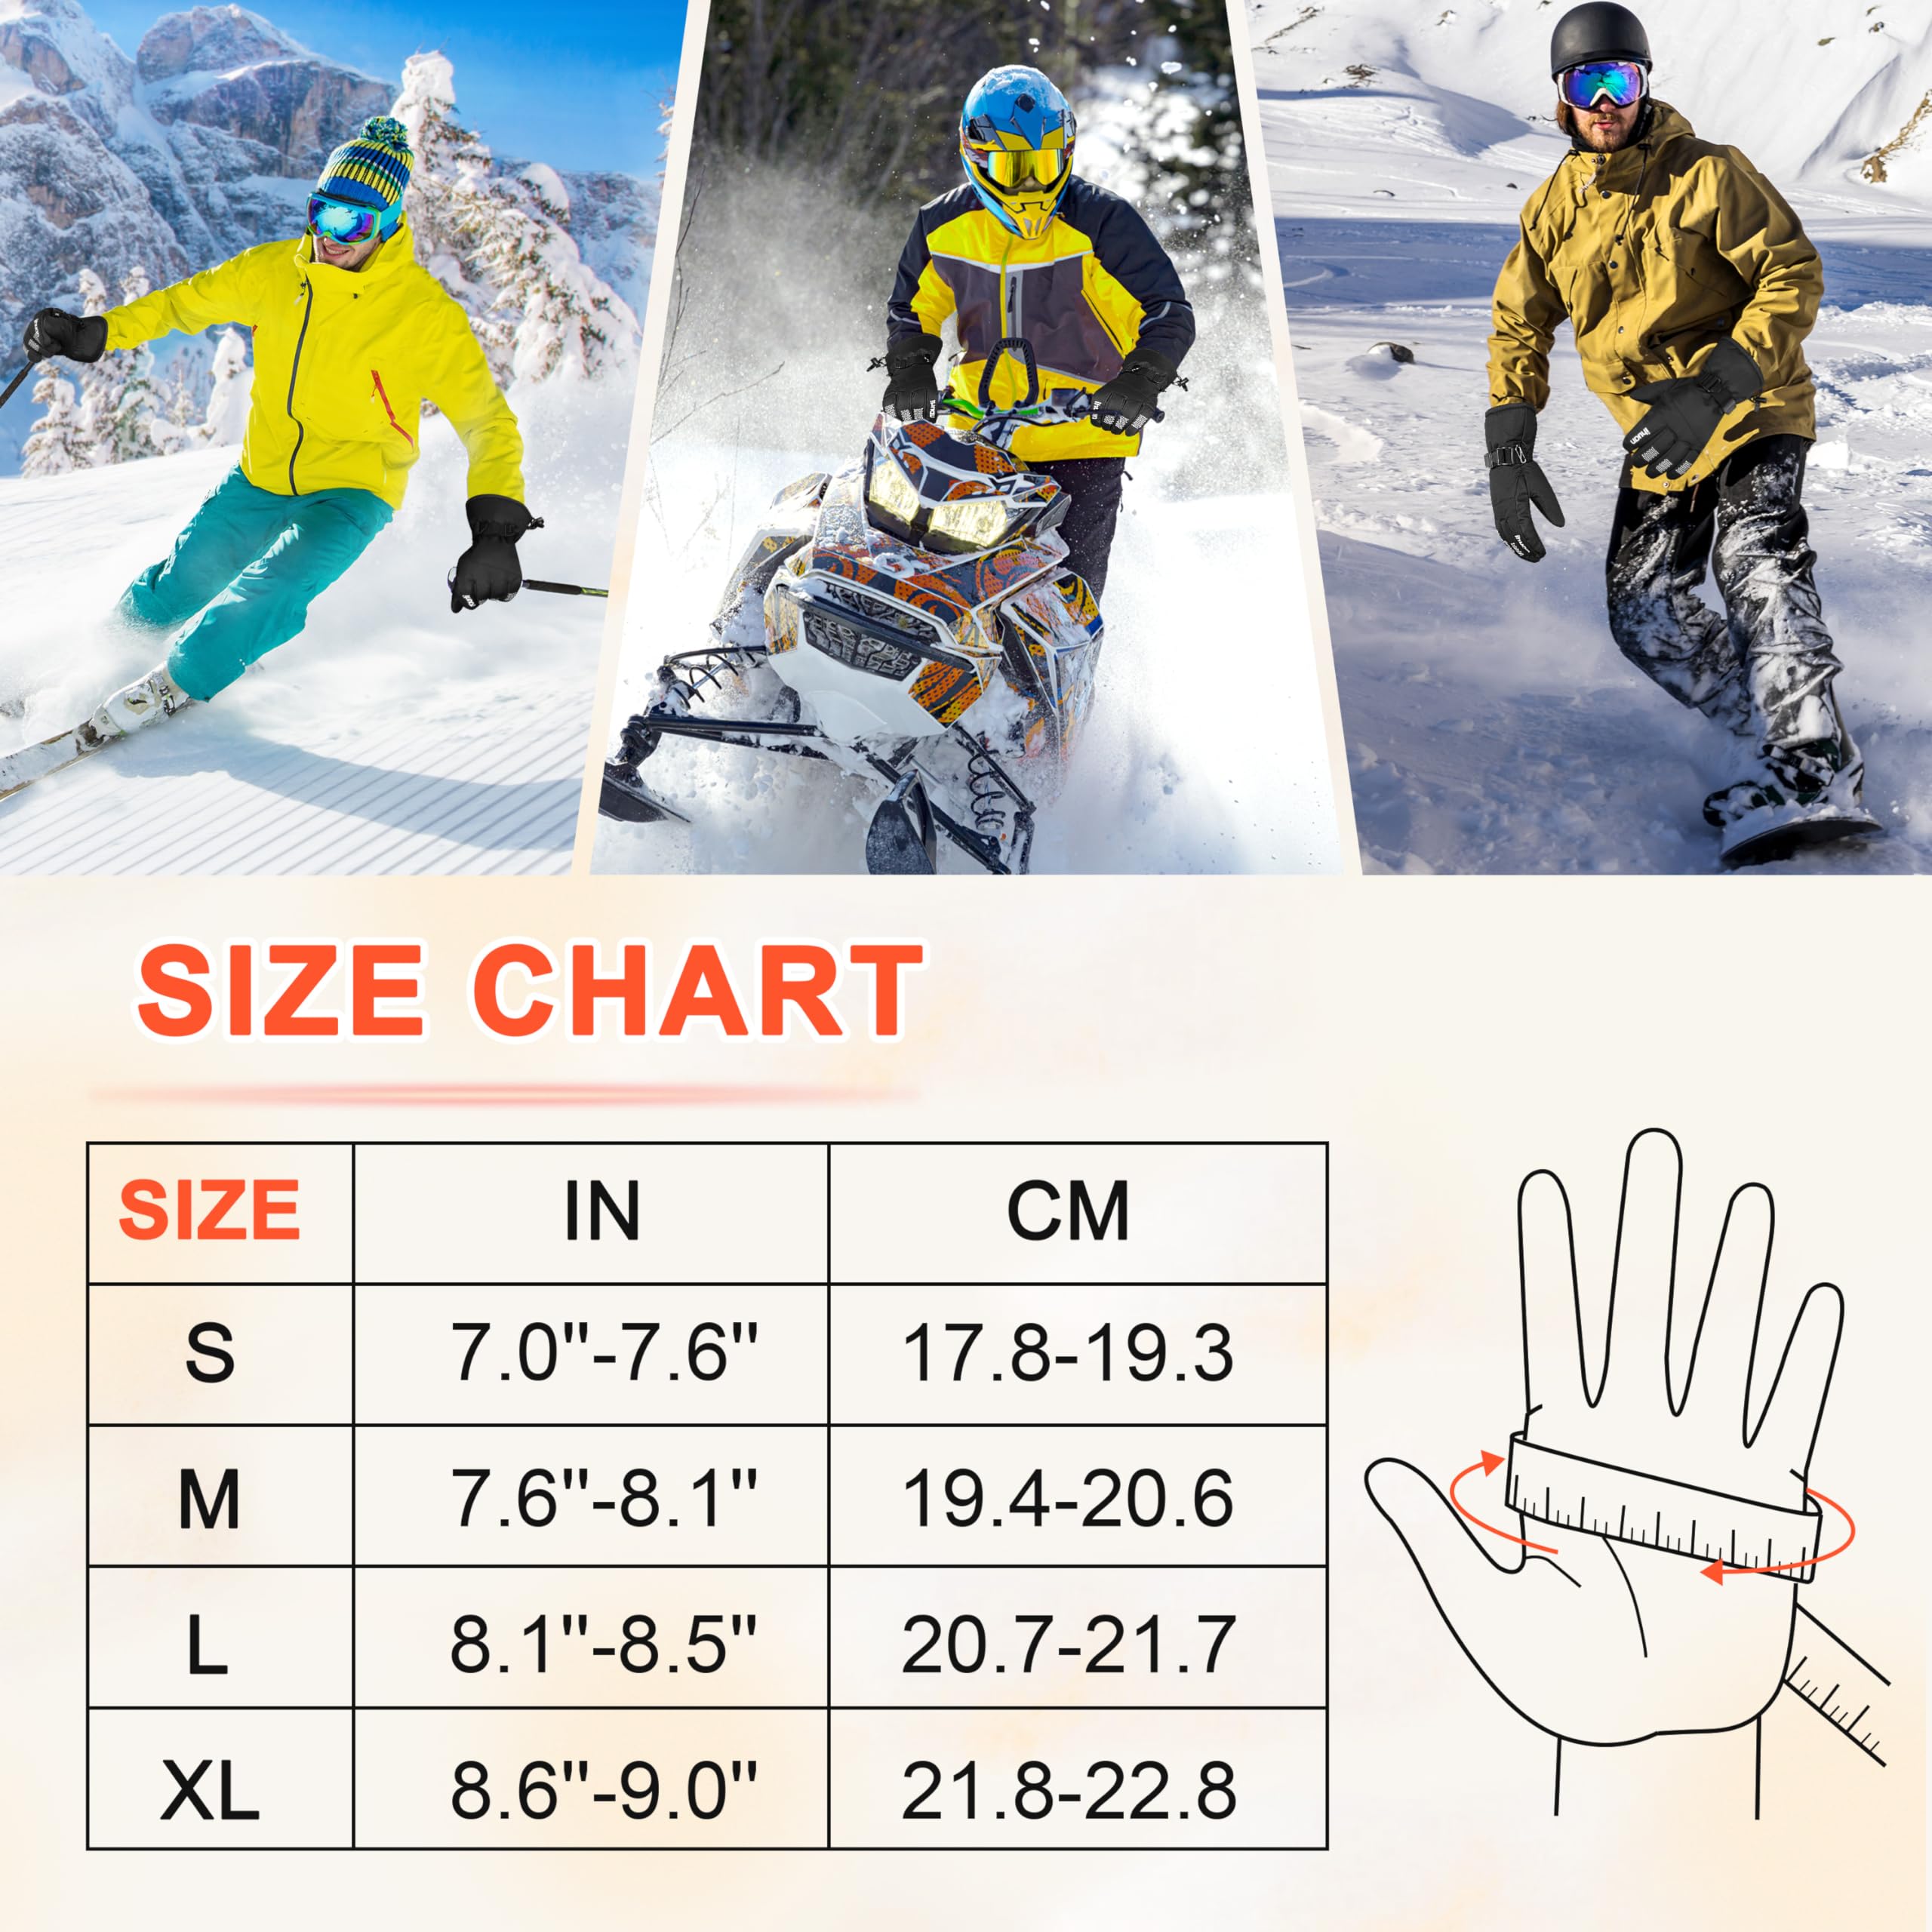 ihuan Waterproof Heated Gloves for Men Women - 5000mah Rechargeable Winter Heating Gloves, Touchscreen Electric Gloves Ski